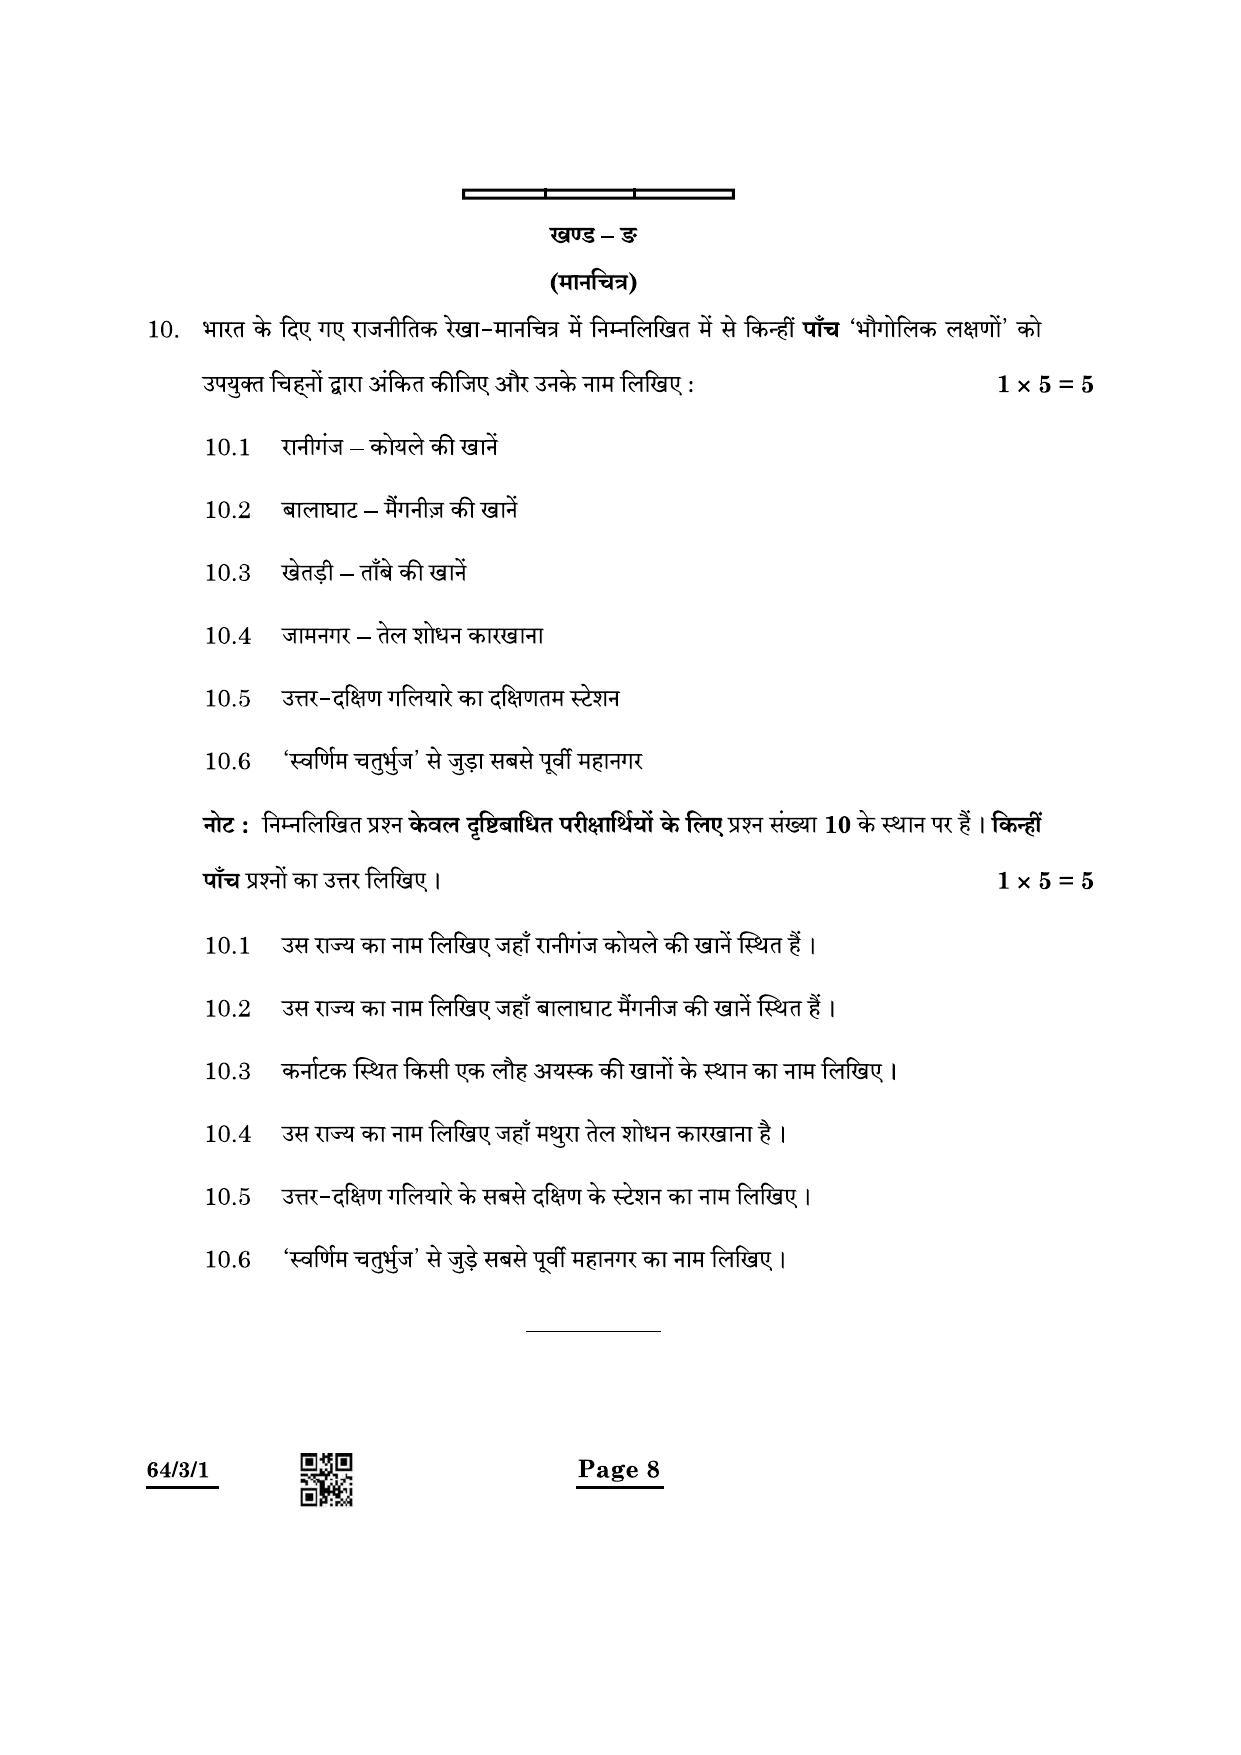 CBSE Class 12 64-3-1 Geography 2022 Question Paper - Page 8